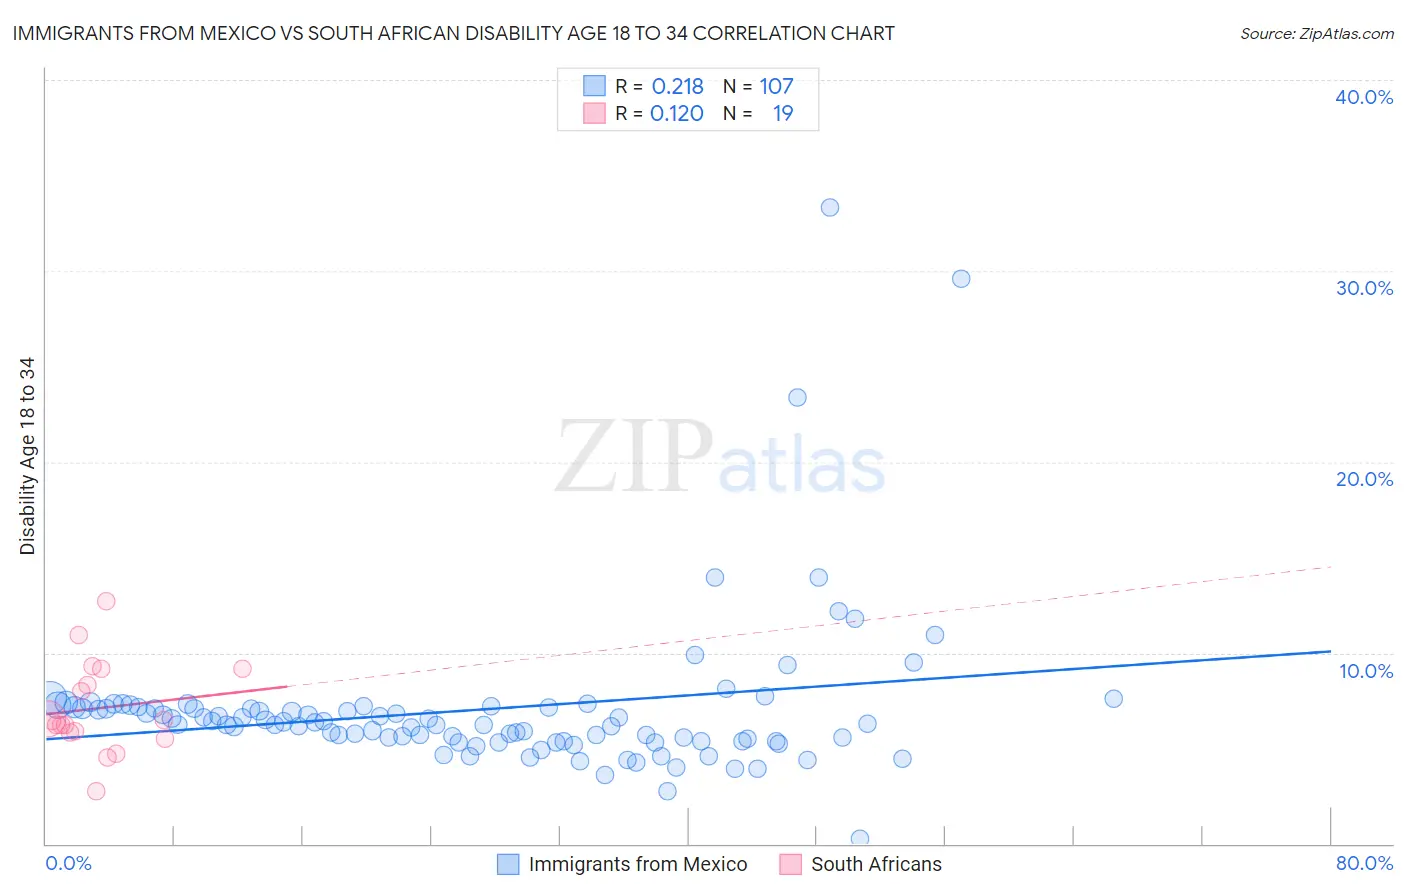 Immigrants from Mexico vs South African Disability Age 18 to 34